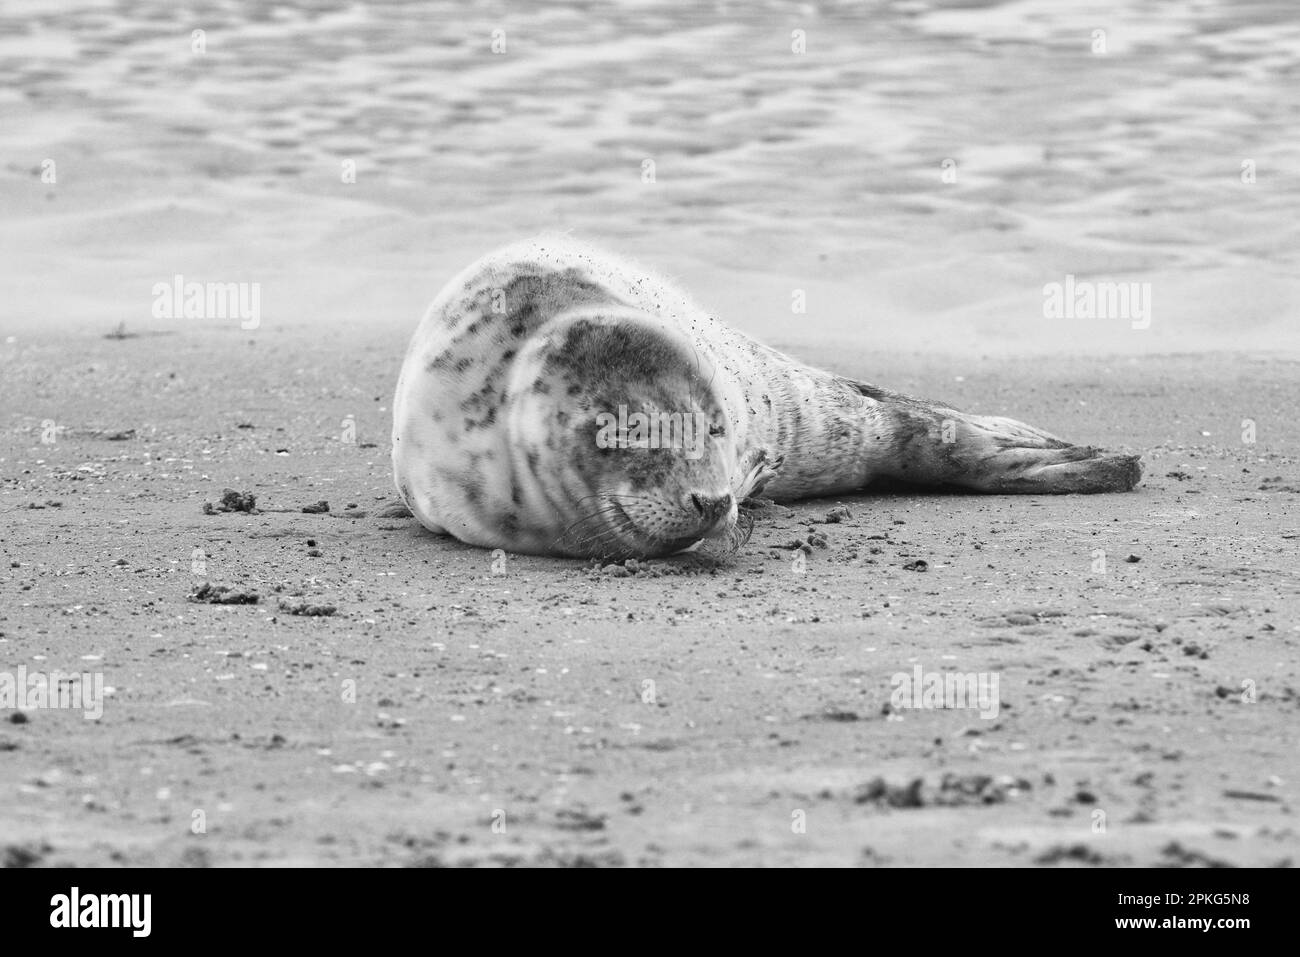 Baby seal relaxing enjoying the lovely day on a Baltic Sea beach. Seal with a soft fur coat long whiskers dark eyes and sharp claws. Harmony with natu Stock Photo